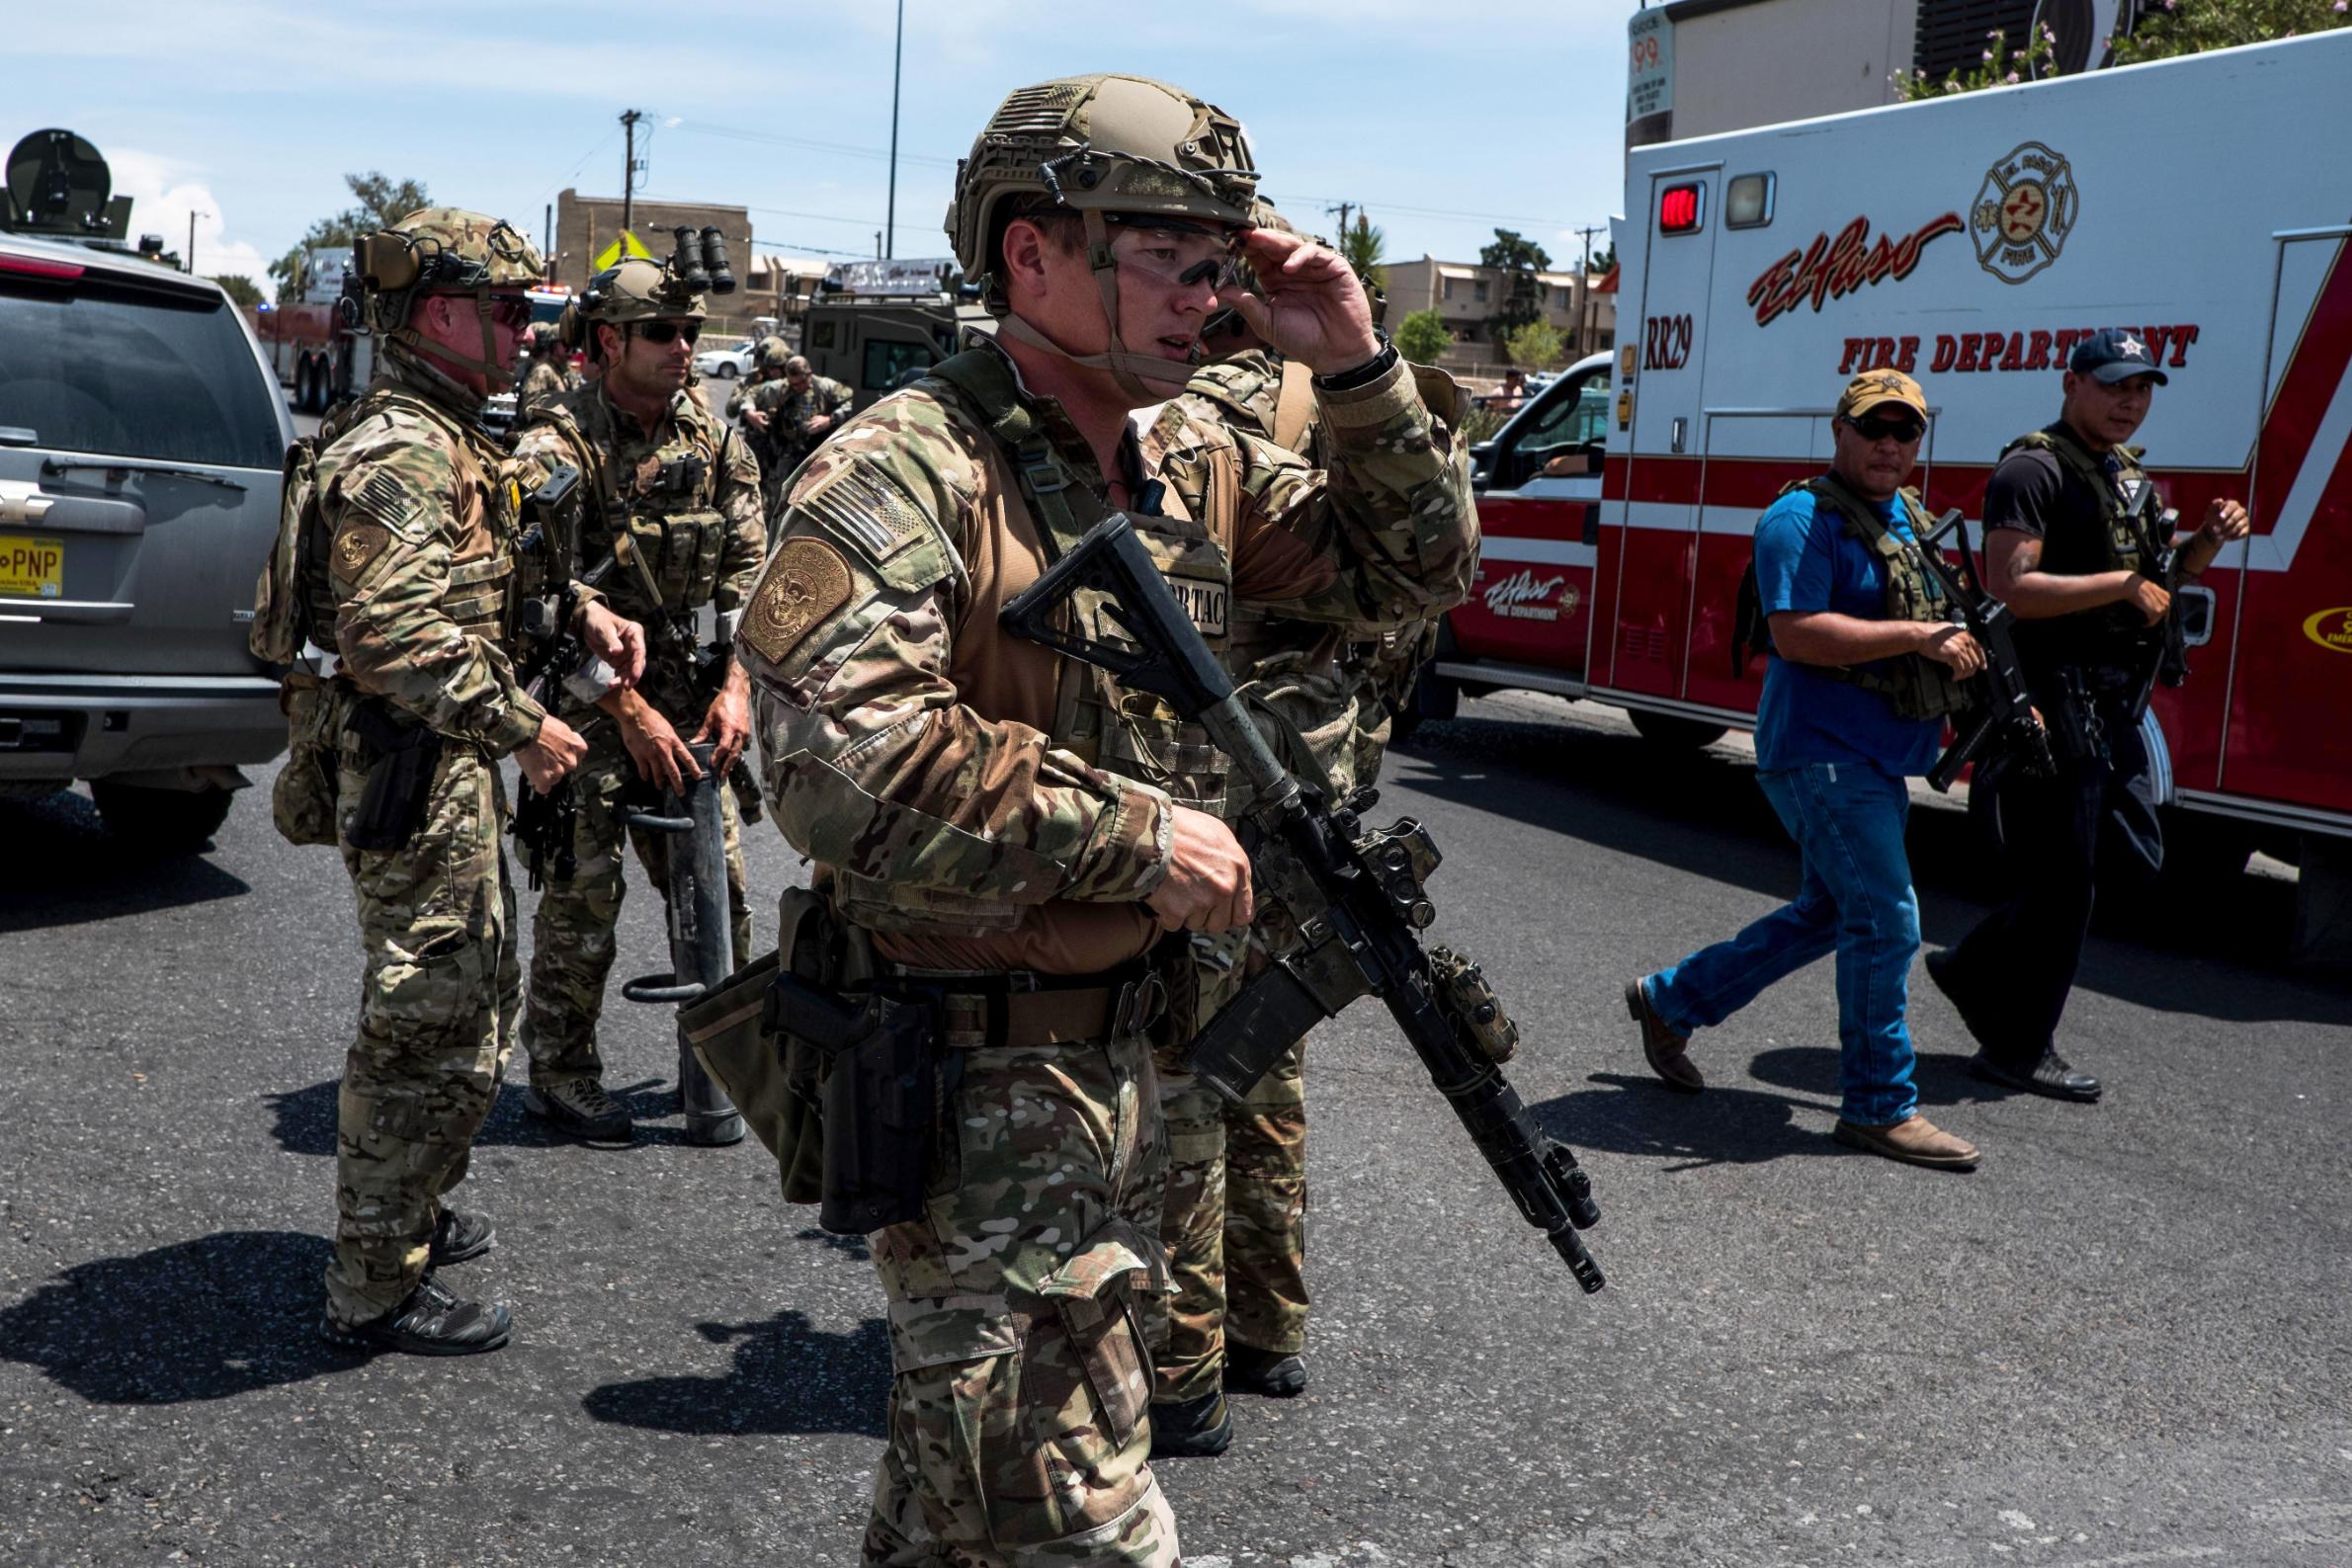 Episode 296: Looking at the El Paso and Dayton Shootings w/ Monica Perez